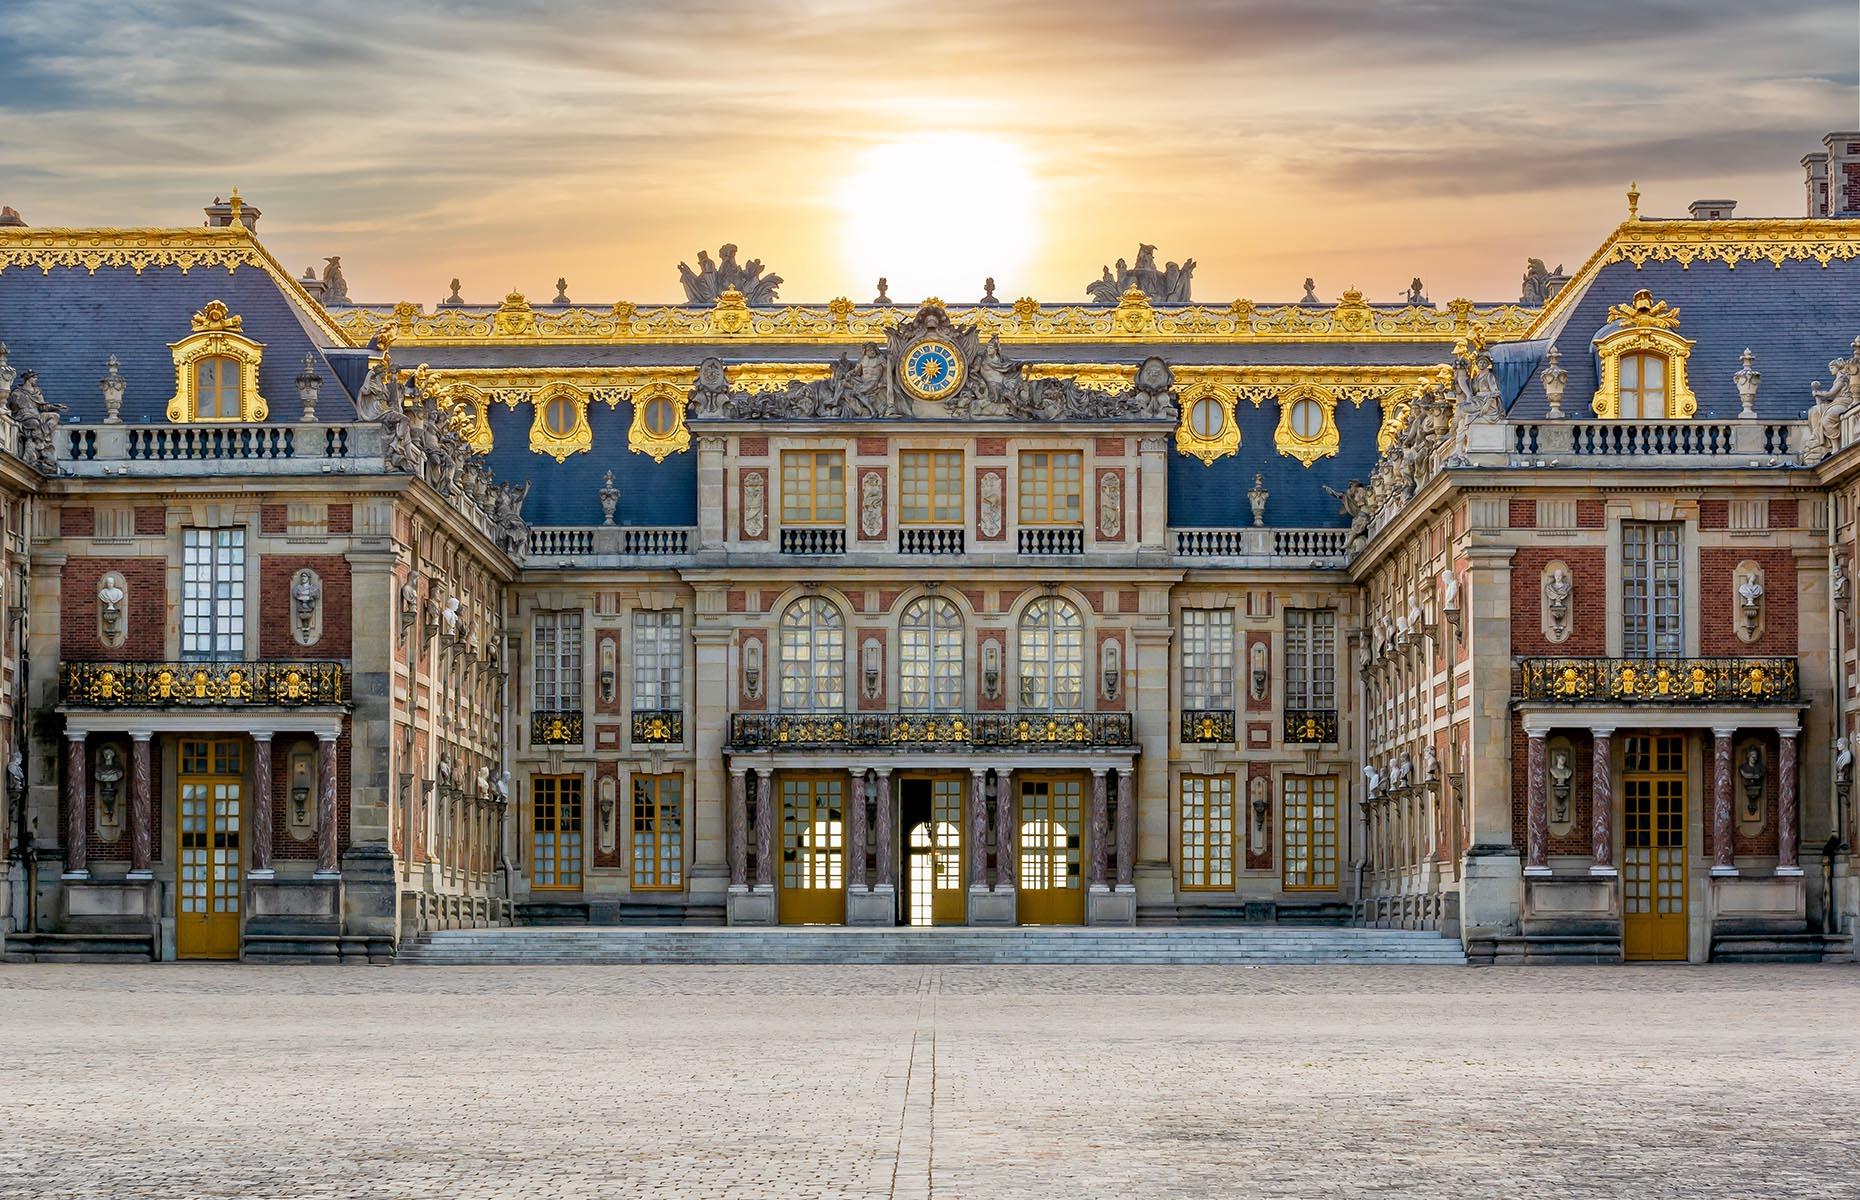 <p>The French royal family ruled from the opulent Palace of Versailles (pictured), located in the town of the same name.</p>  <p>King Louis XIII first began building Versailles back in 1624, when it served as a small hunting lodge for his personal use. Various rebuilds over the ensuing years laid the foundations for the lavish palace that's famous the world over today.</p>  <p>Louis XIII's successor, Louis XIV, decided to move the French royal court to Versailles in 1682, officially making it the center of political power in the country. </p>